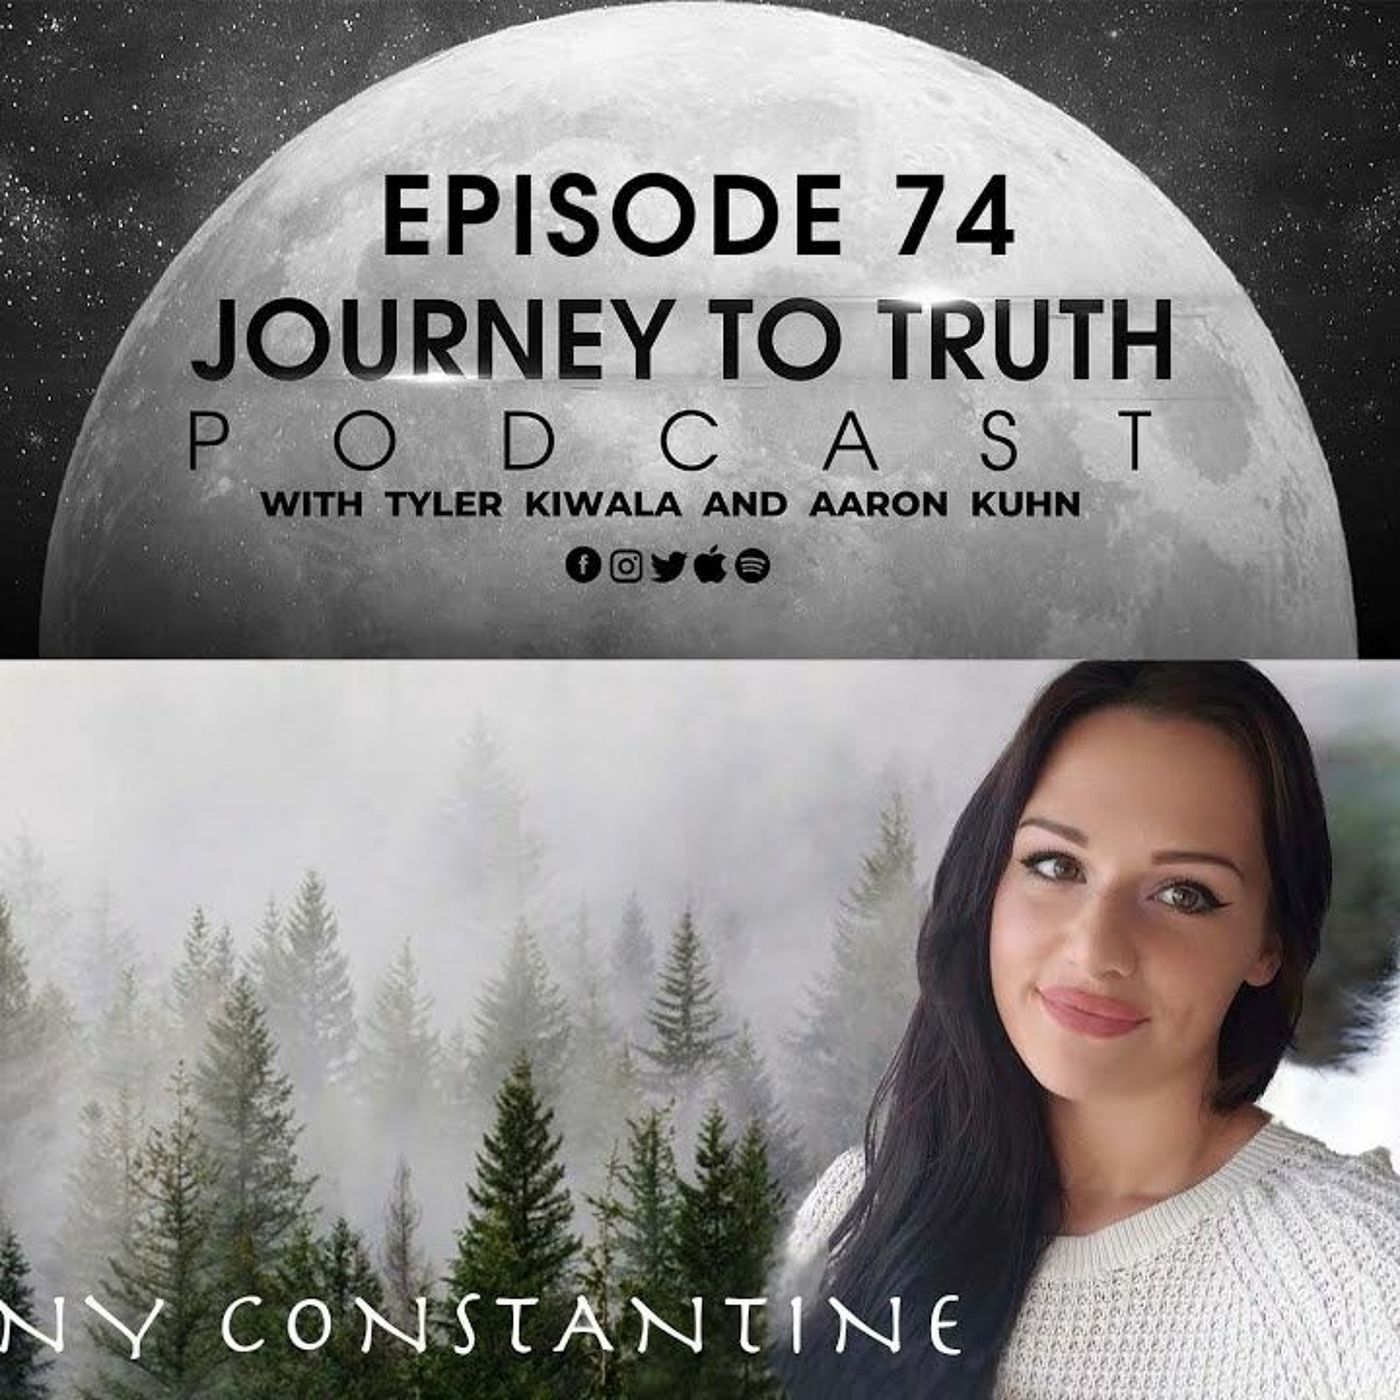 EP 74 - Jenny Constantine - Q Movement Growing - Child Trafficking Takedown - Take Off Your Mask!